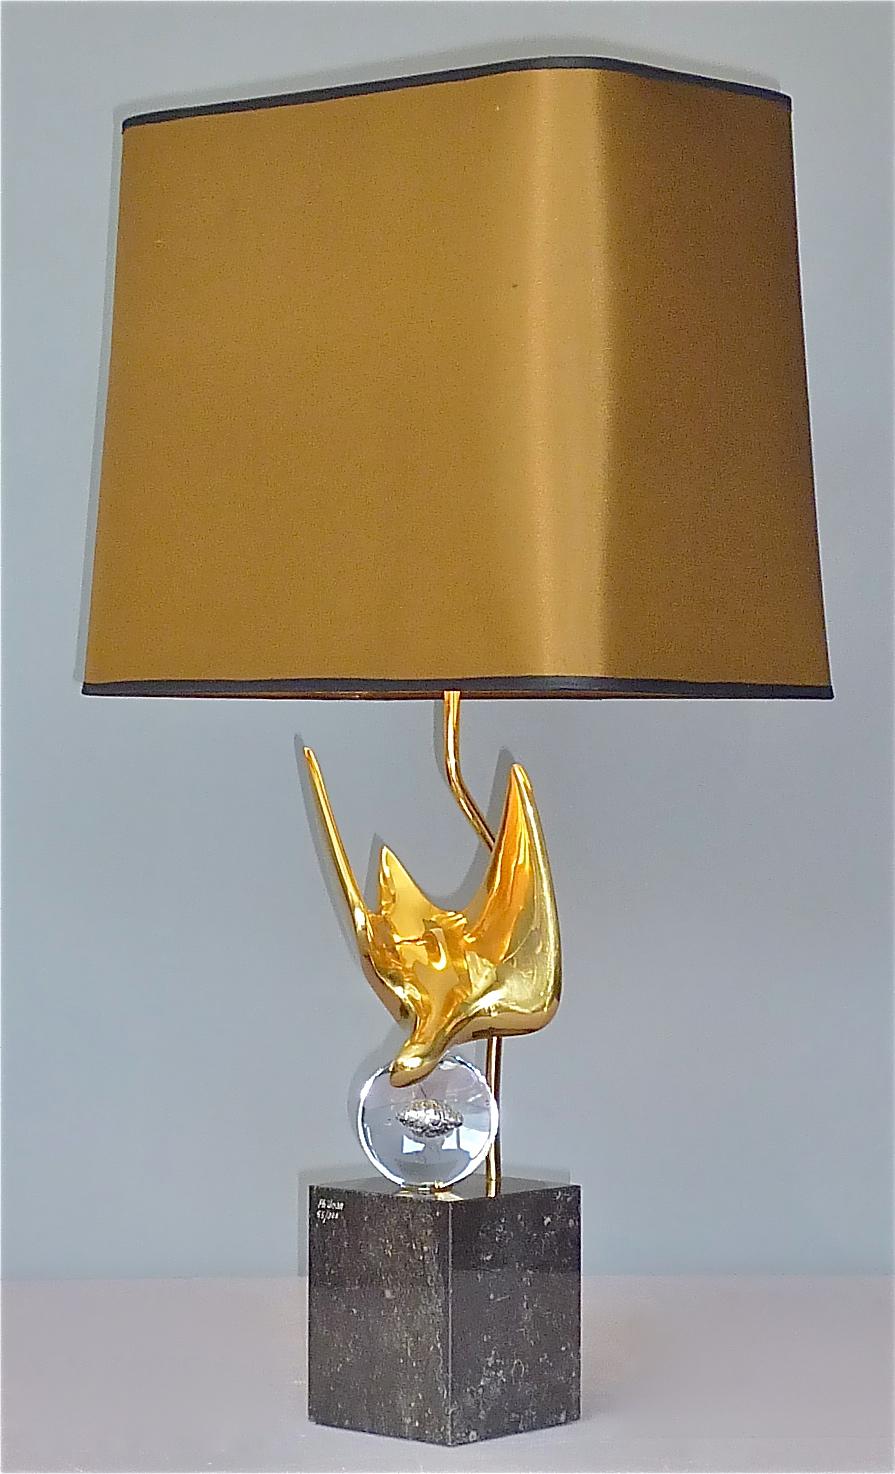 Superb and very rare sculptural French abstract bird table lamp by artist Philippe Jean, France around 1970s. The table lamp has a square heavy black-grey granite base signed Ph. Jean and 55/300, so from a limited edition, a crystal glass globe